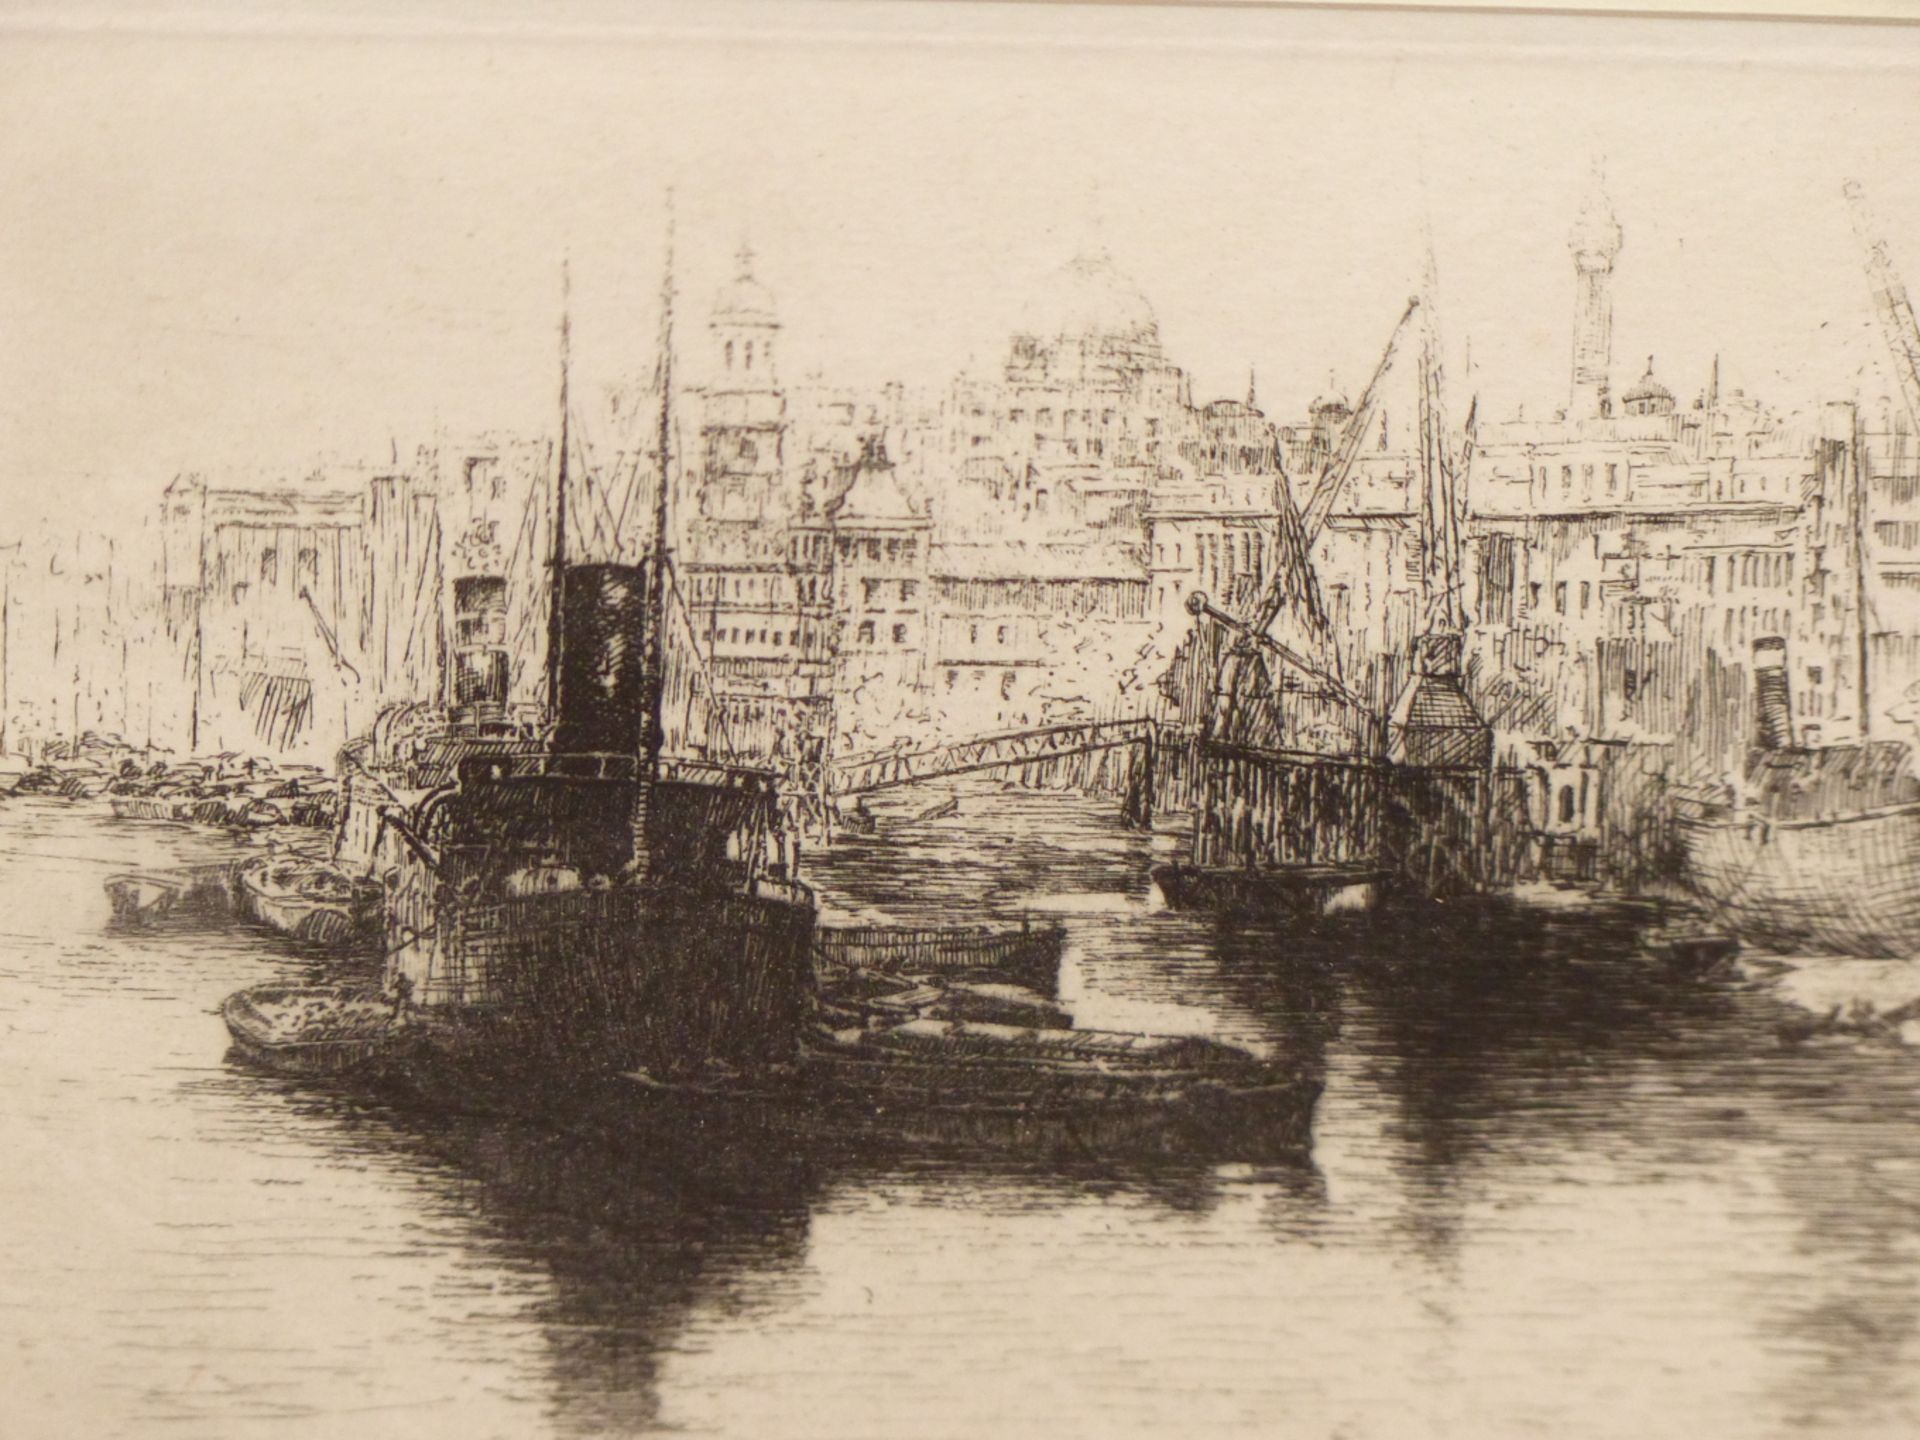 EDWARD J CHERRY. (1886-1960) ARR. THE HOUSES OF PARLIAMENT . ETCHING. PENCIL SIGNED ARTIST PROOF - Image 2 of 7